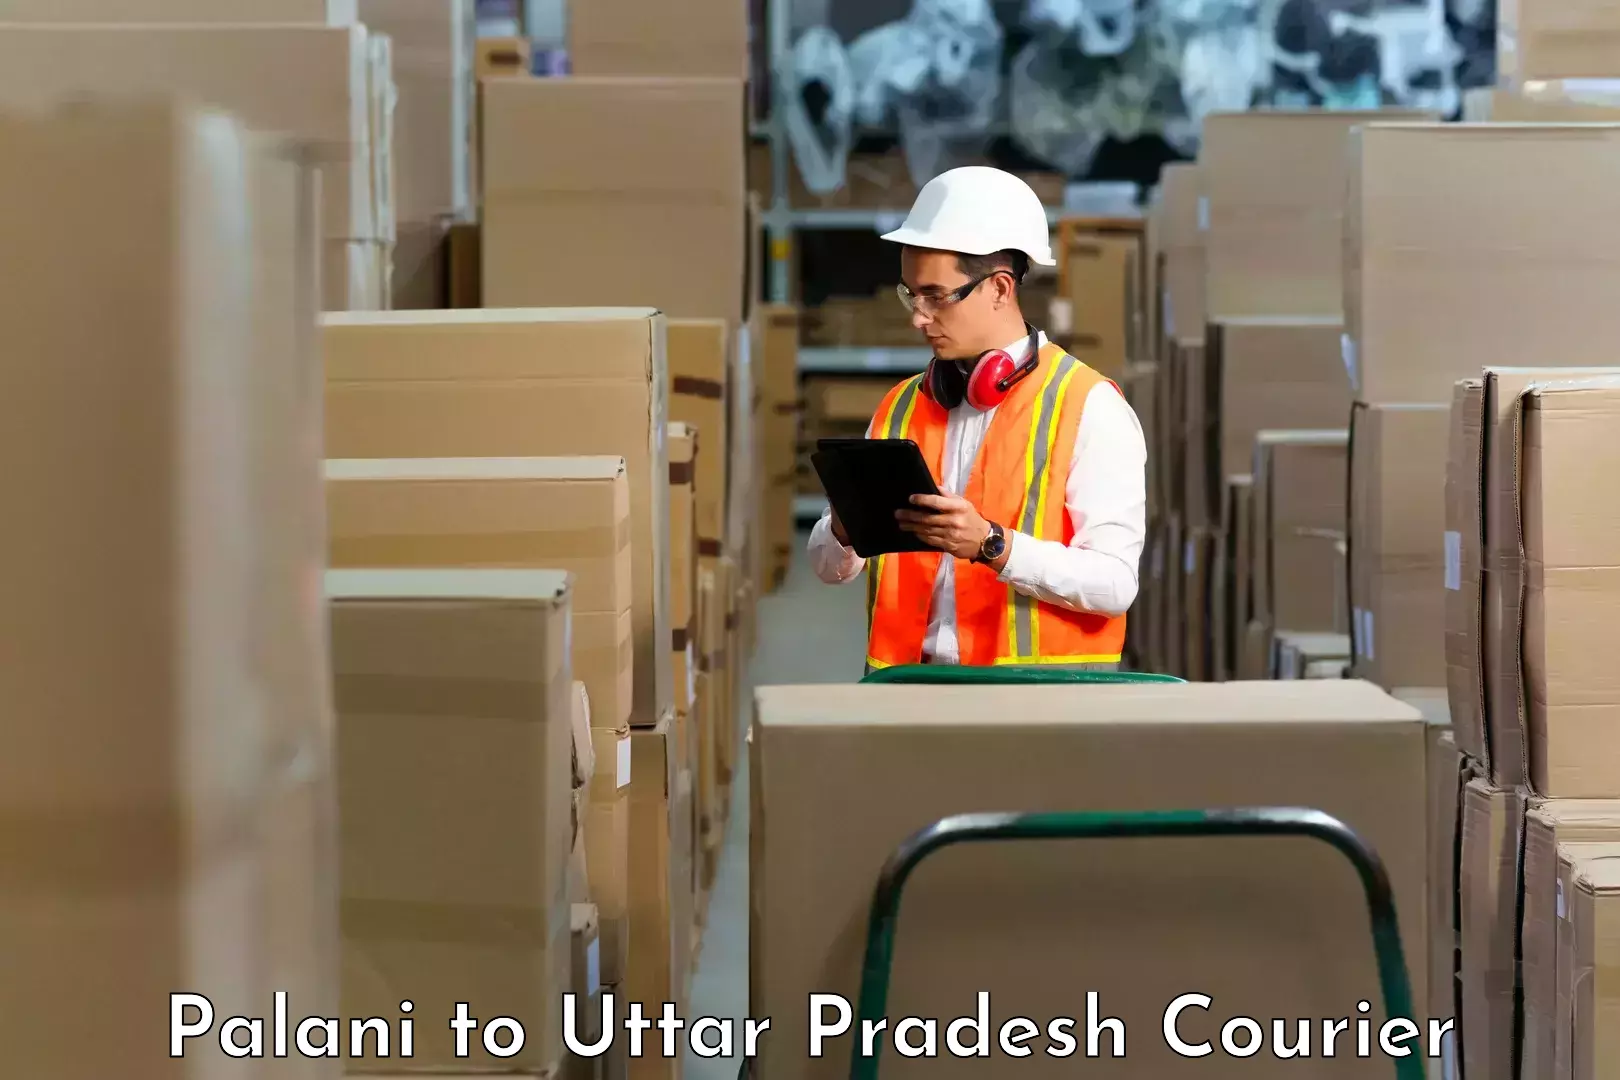 Reliable delivery network Palani to Saharanpur